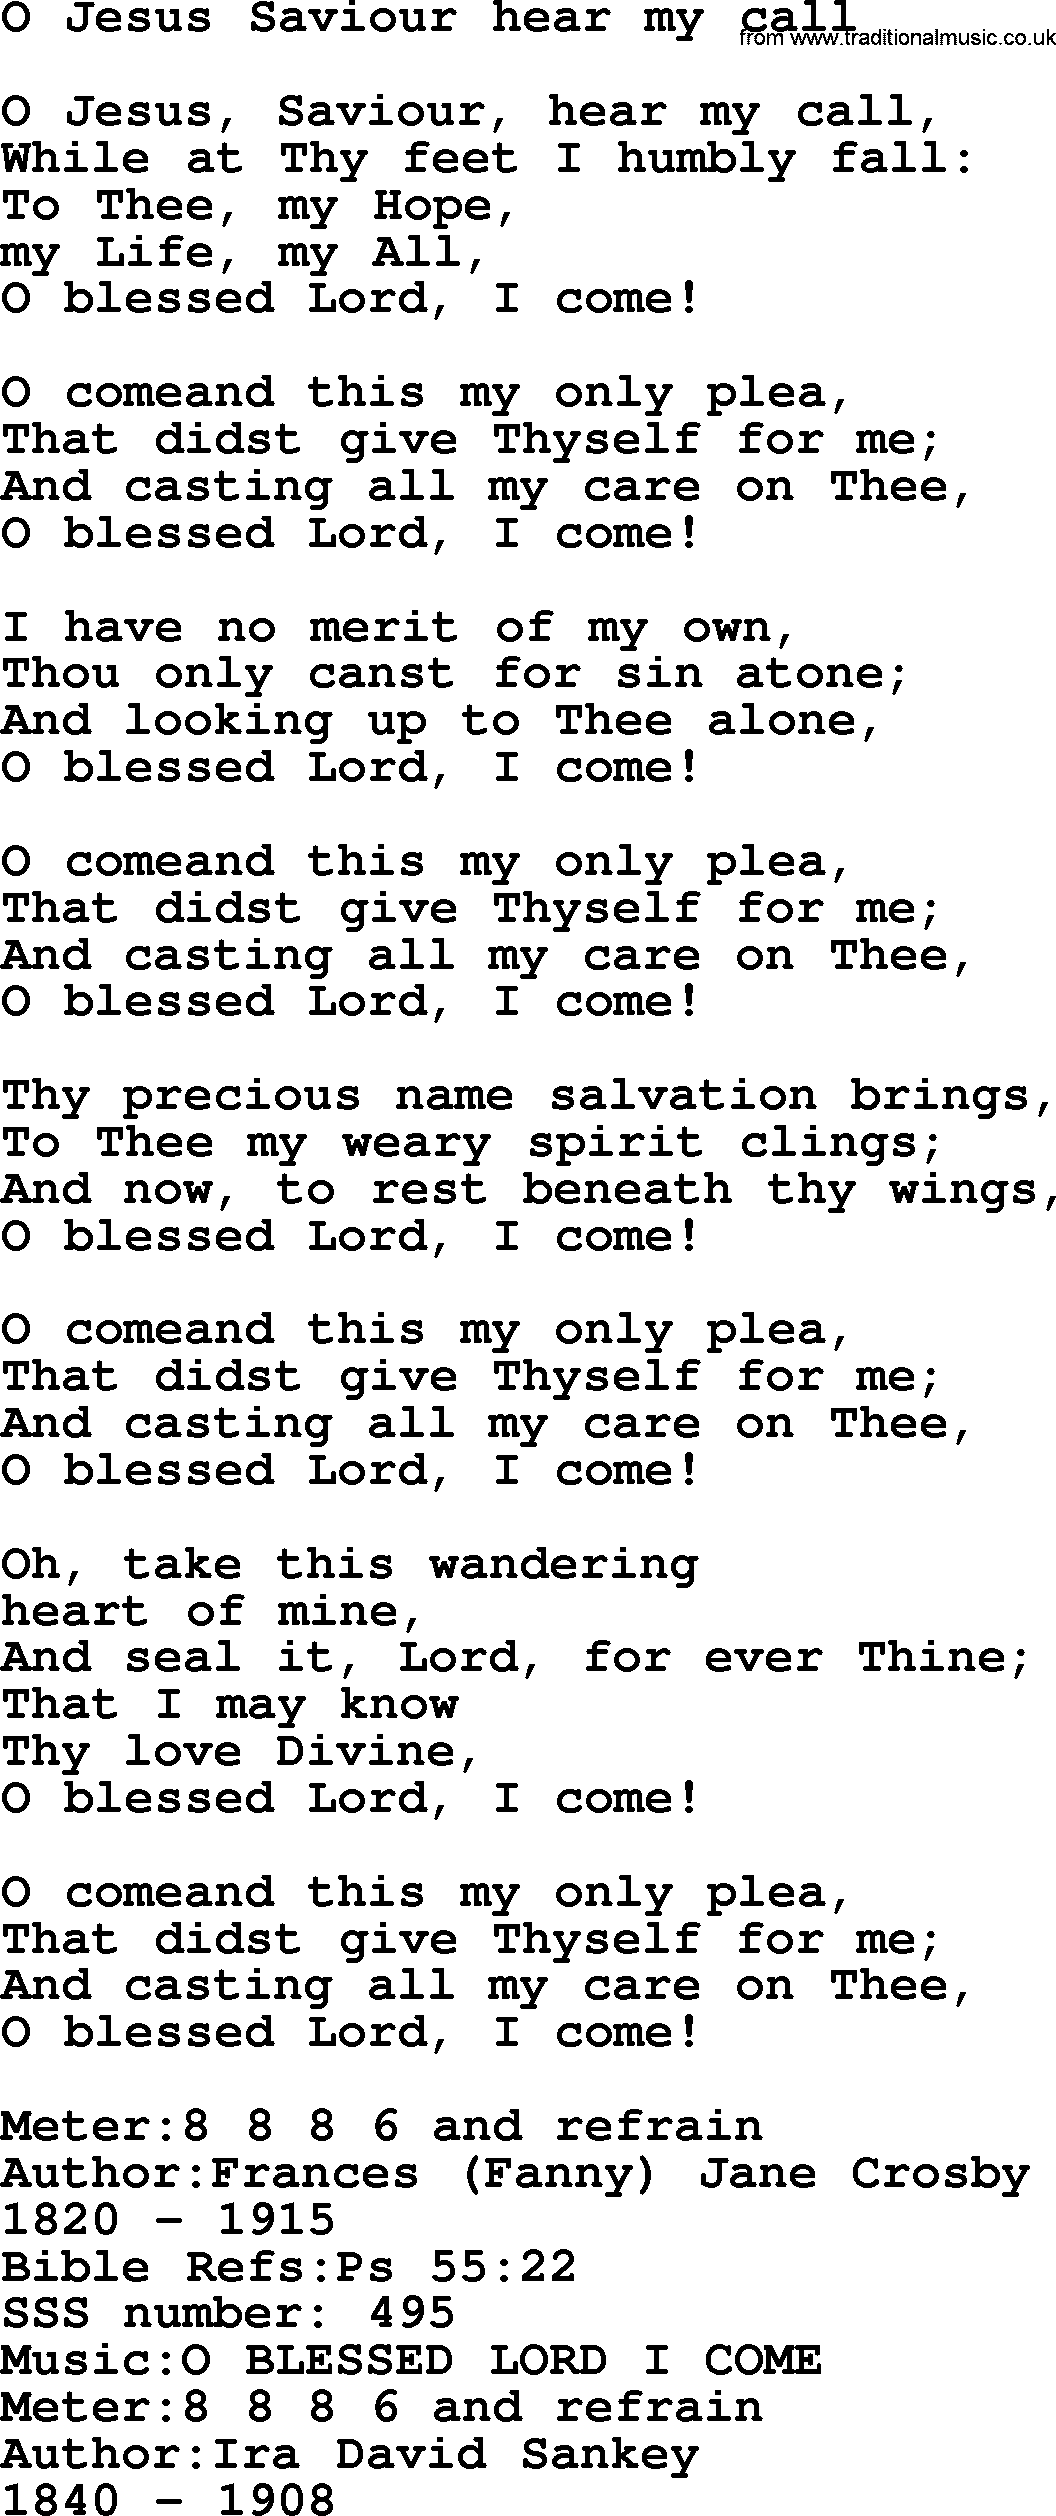 Sacred Songs and Solos complete, 1200 Hymns, title: O Jesus Saviour Hear My Call, lyrics and PDF